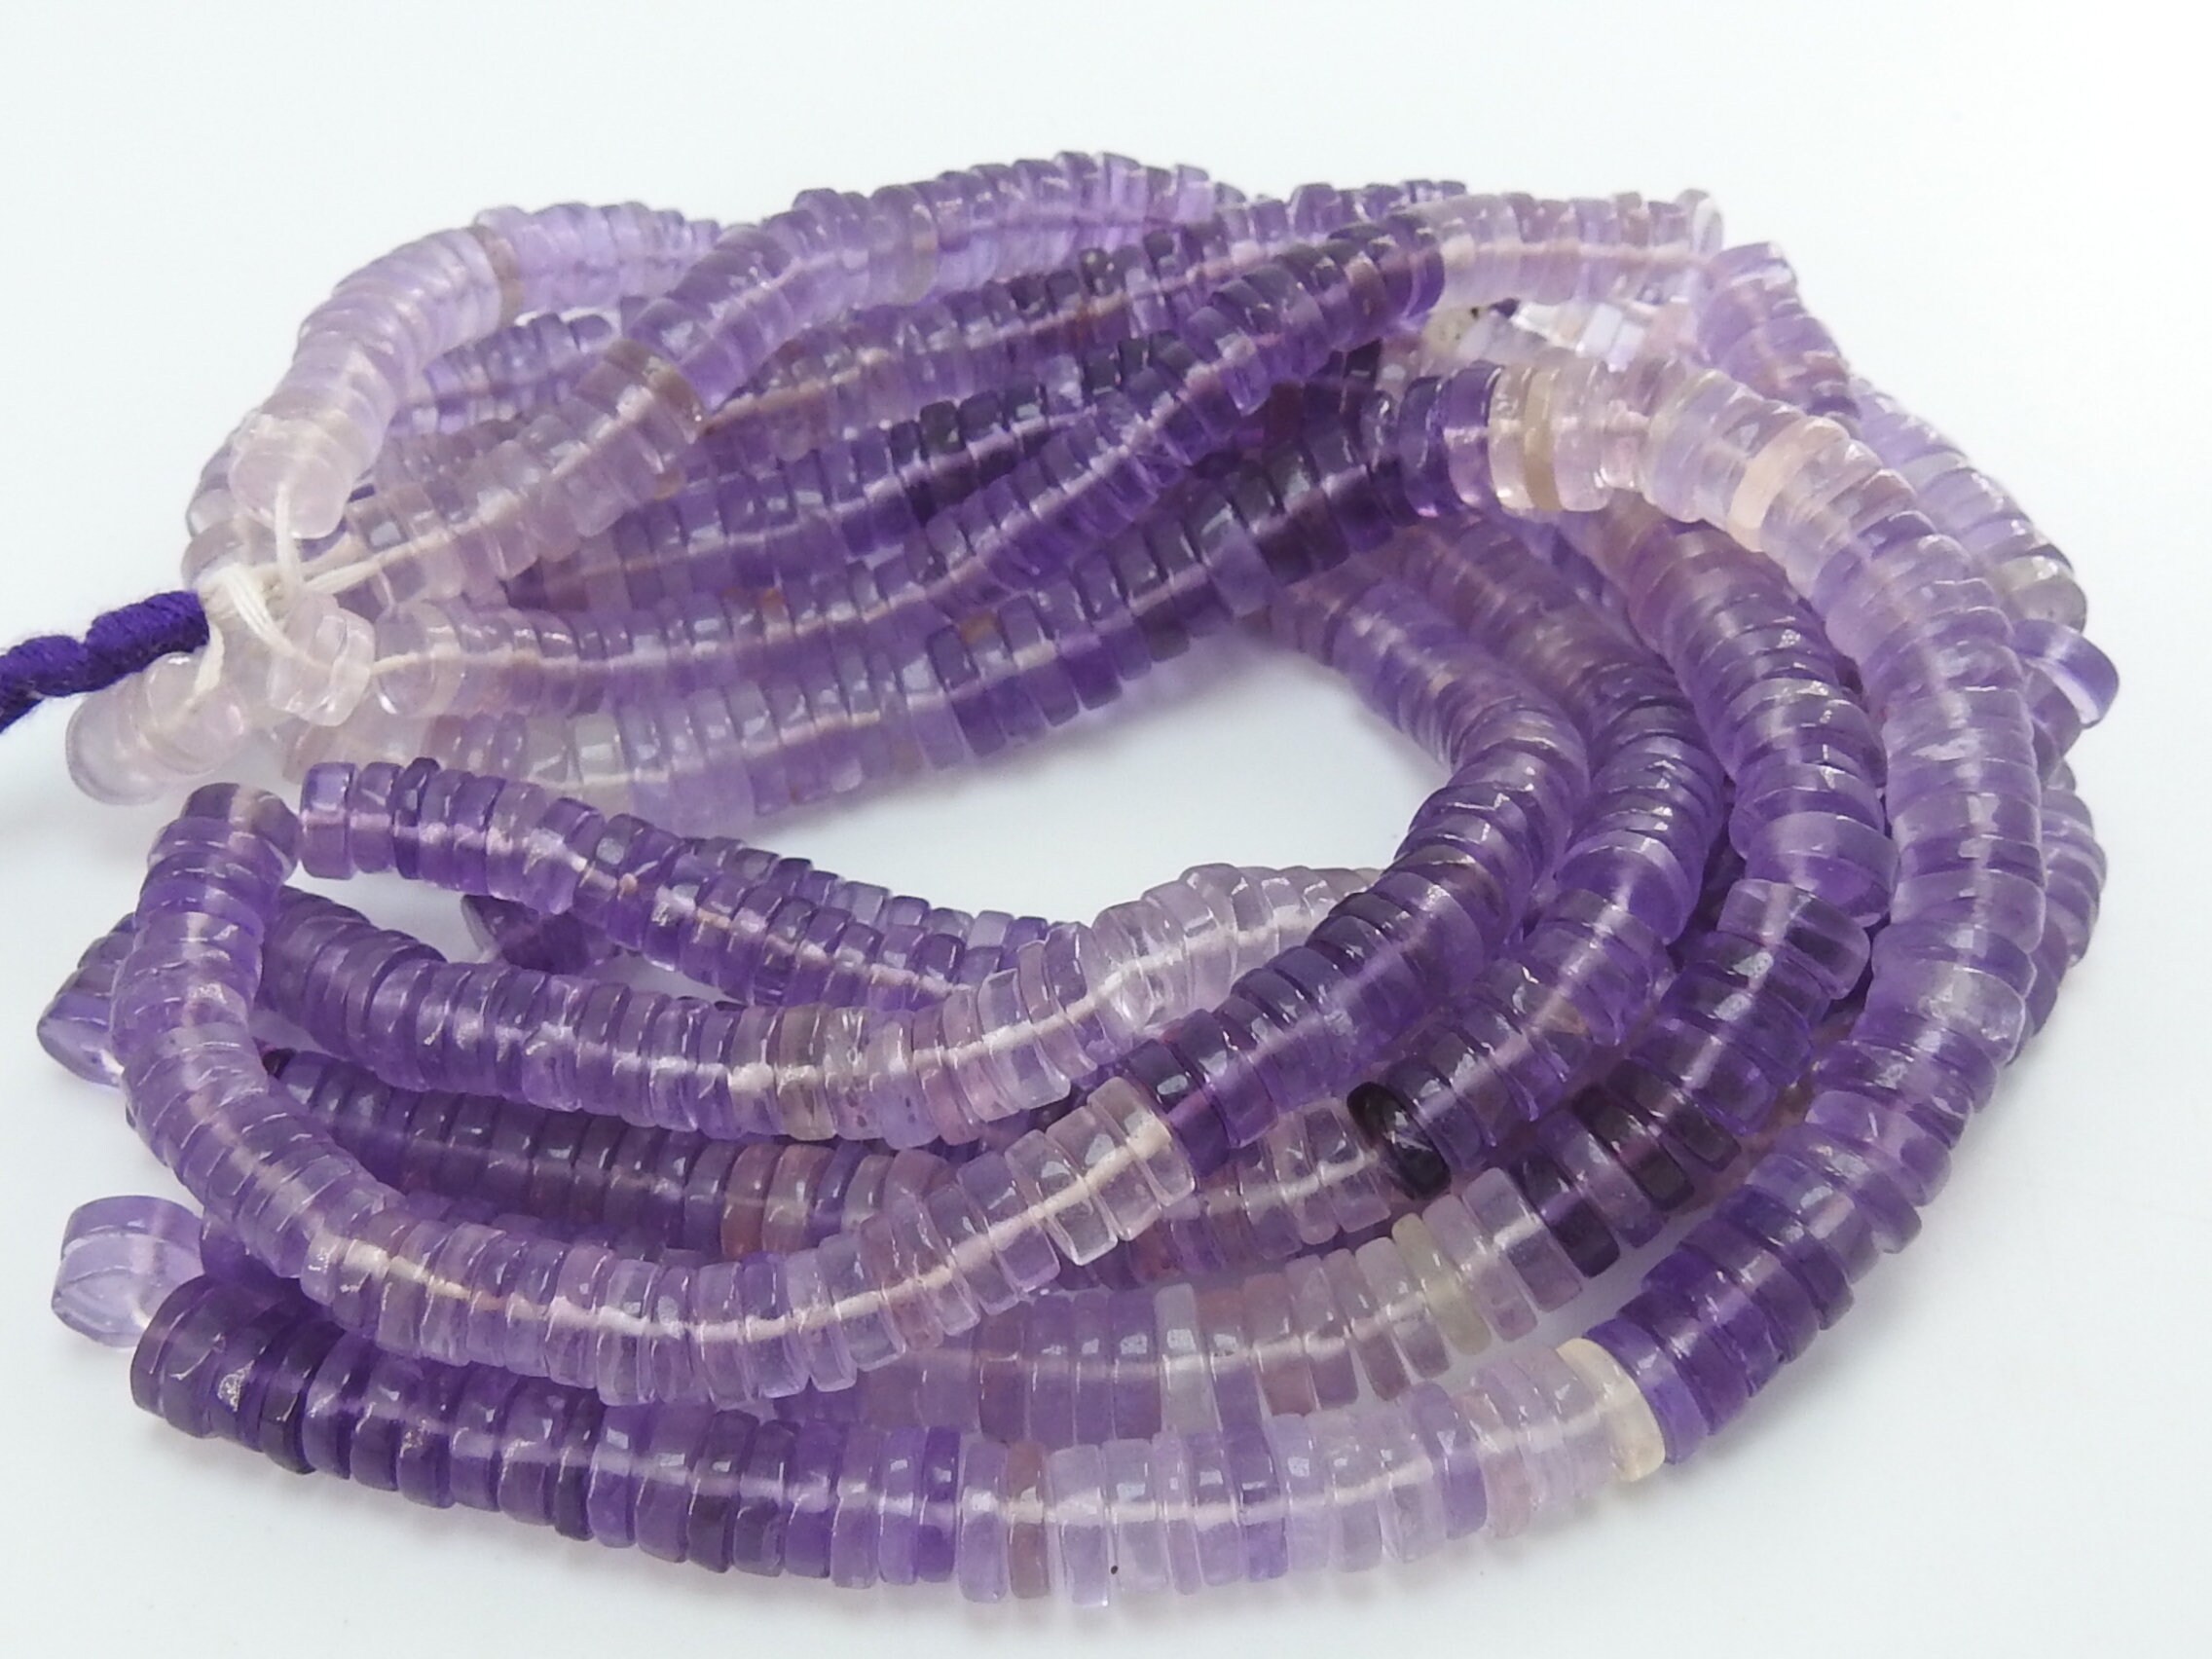 Natural Amethyst Smooth Tyre,Coin,Button,Wheel Shape Bead,Multi Shaded,Loose Stone,Wholesaler,Supplies New Arrival 16Inch Strand (Pme)T1 | Save 33% - Rajasthan Living 22